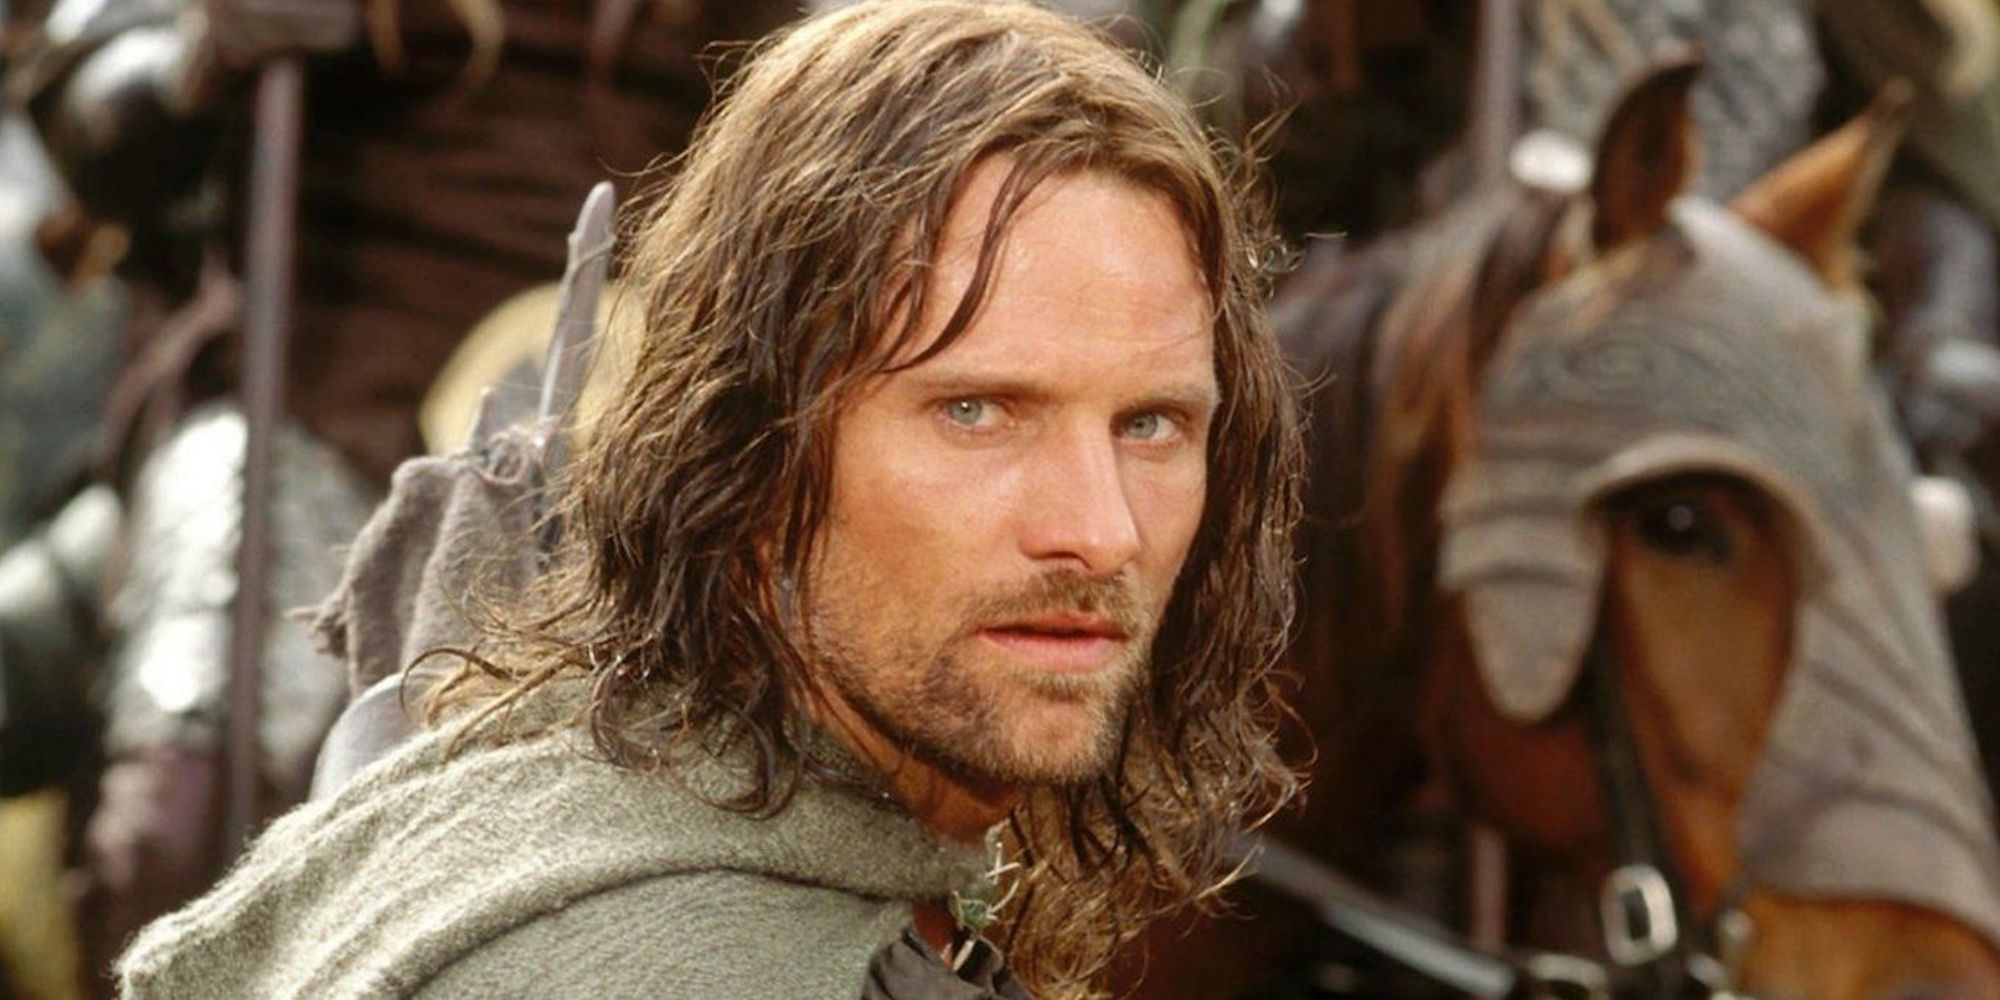 Viggo Mortensen in 'The Lord of the Rings: The Two Towers' (2002)